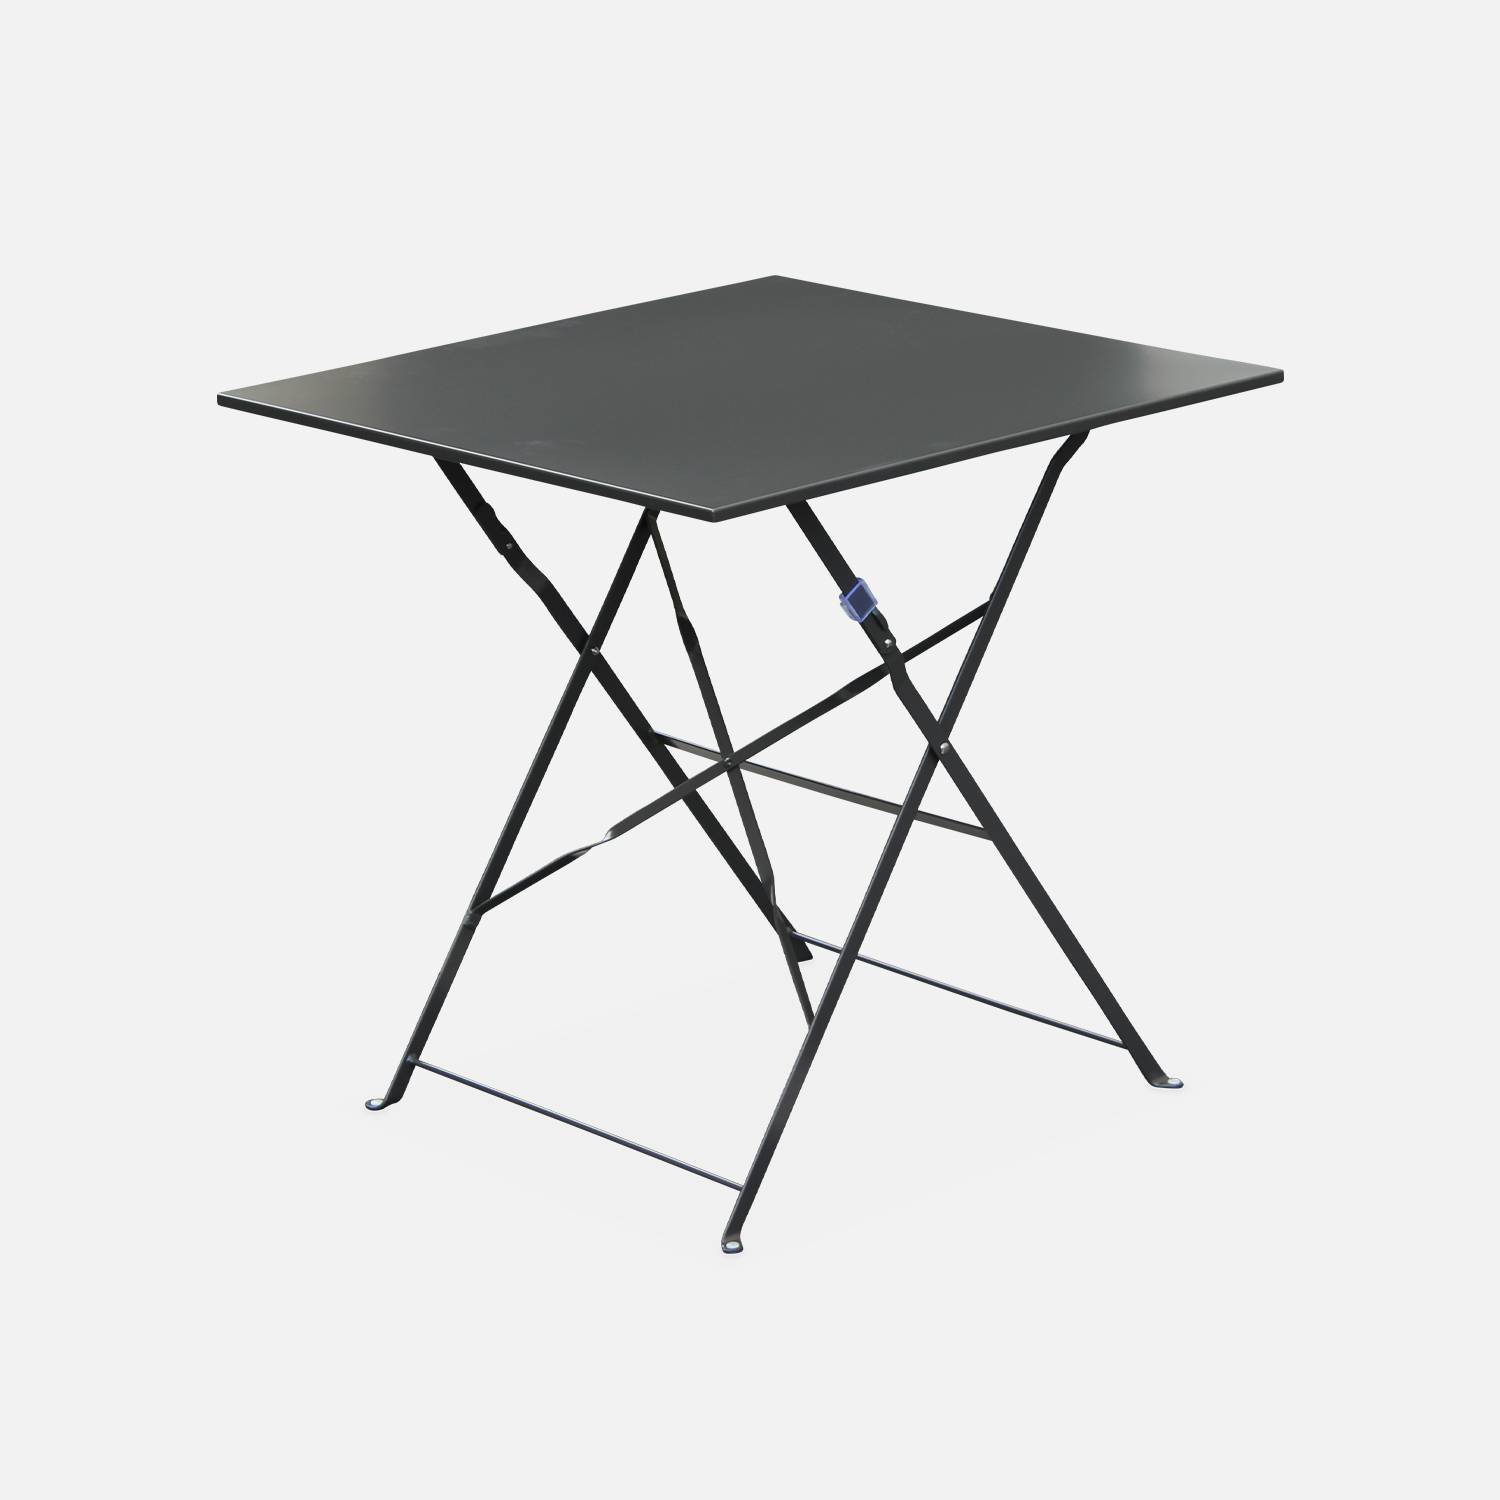 2-seater foldable thermo-lacquered steel bistro garden table, 70x70cm - Anthracite | sweeek